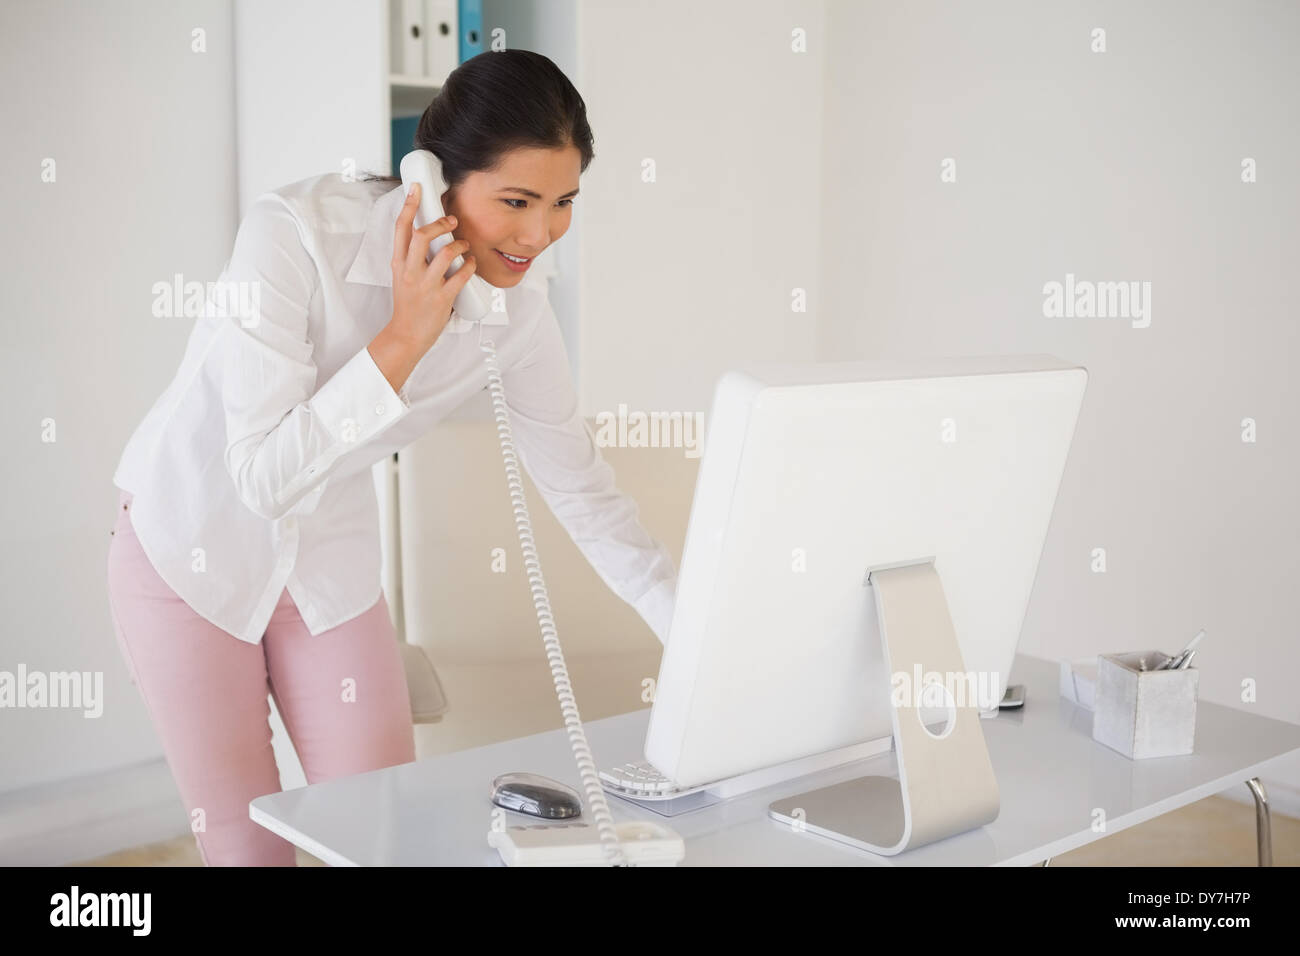 Casual businesswoman answering the phone Stock Photo